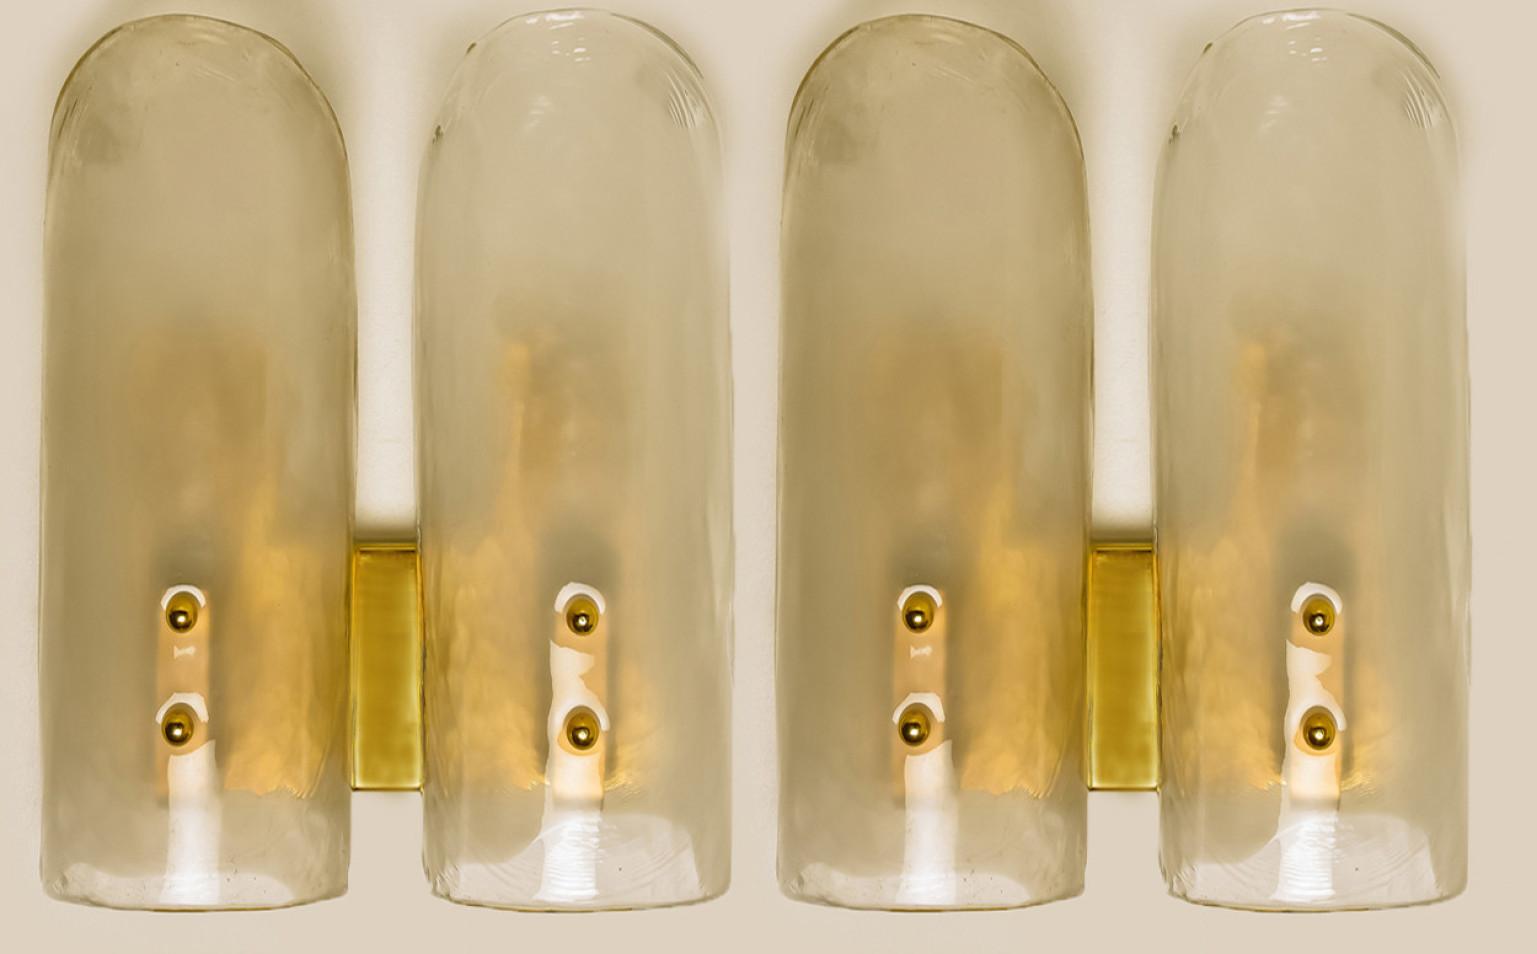 High-end wall sconces made of blown clear and opal murano glass on a messing hardware. Designed and produced by J.T. Kalmar, Austria in the 1960s. Minimalistic design executed with a taste for excellence in craftsmanship. These are real statement